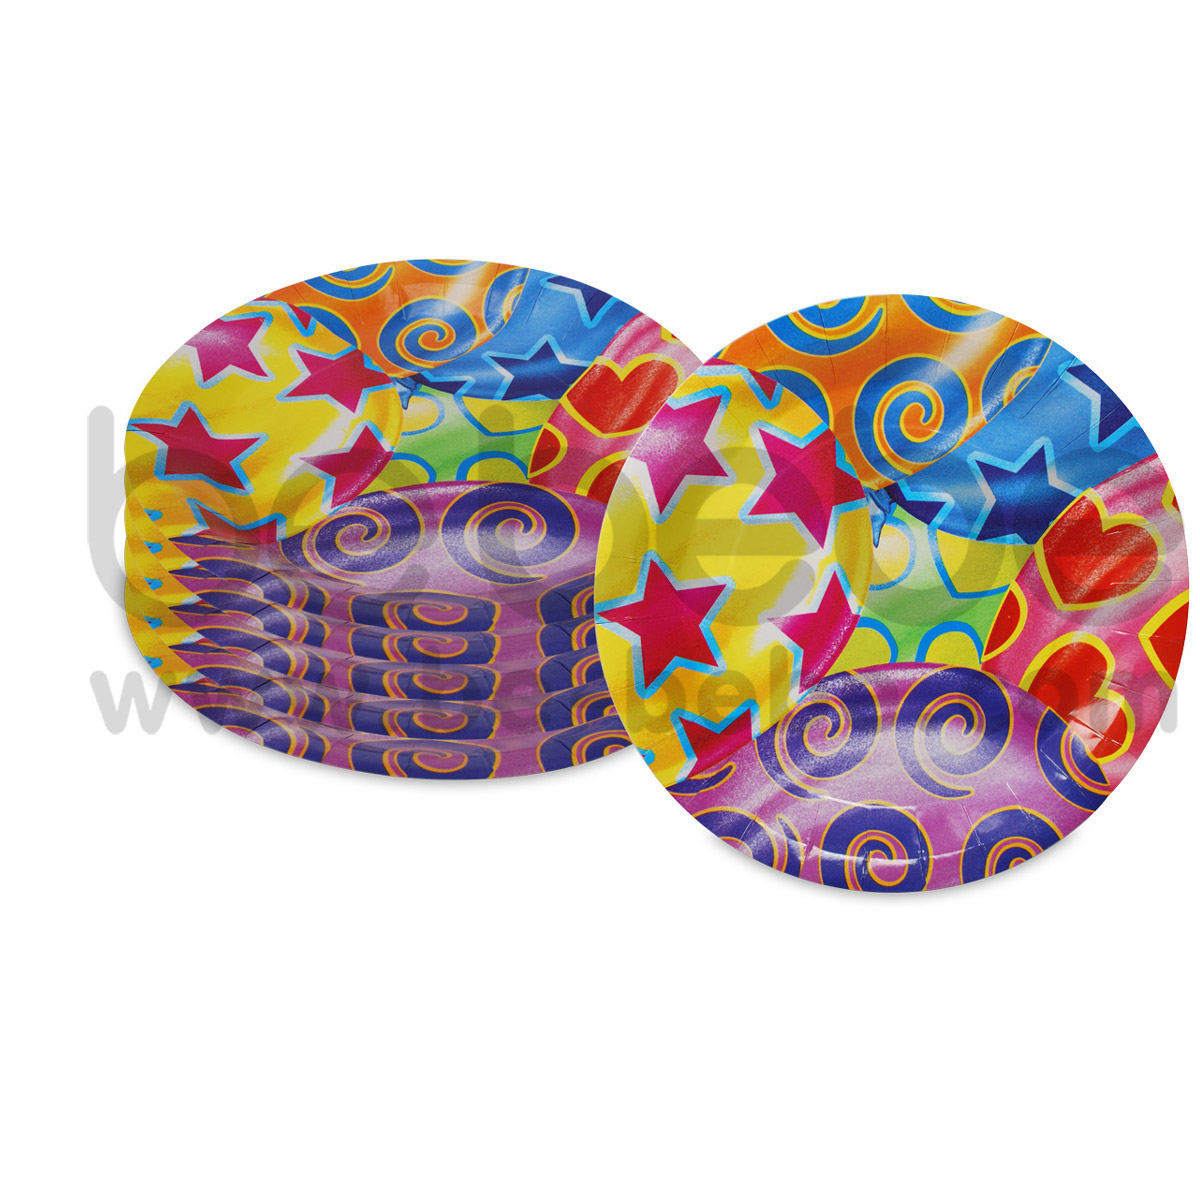 PARTY BUG : Paper plate 7 inch., 1 Pack